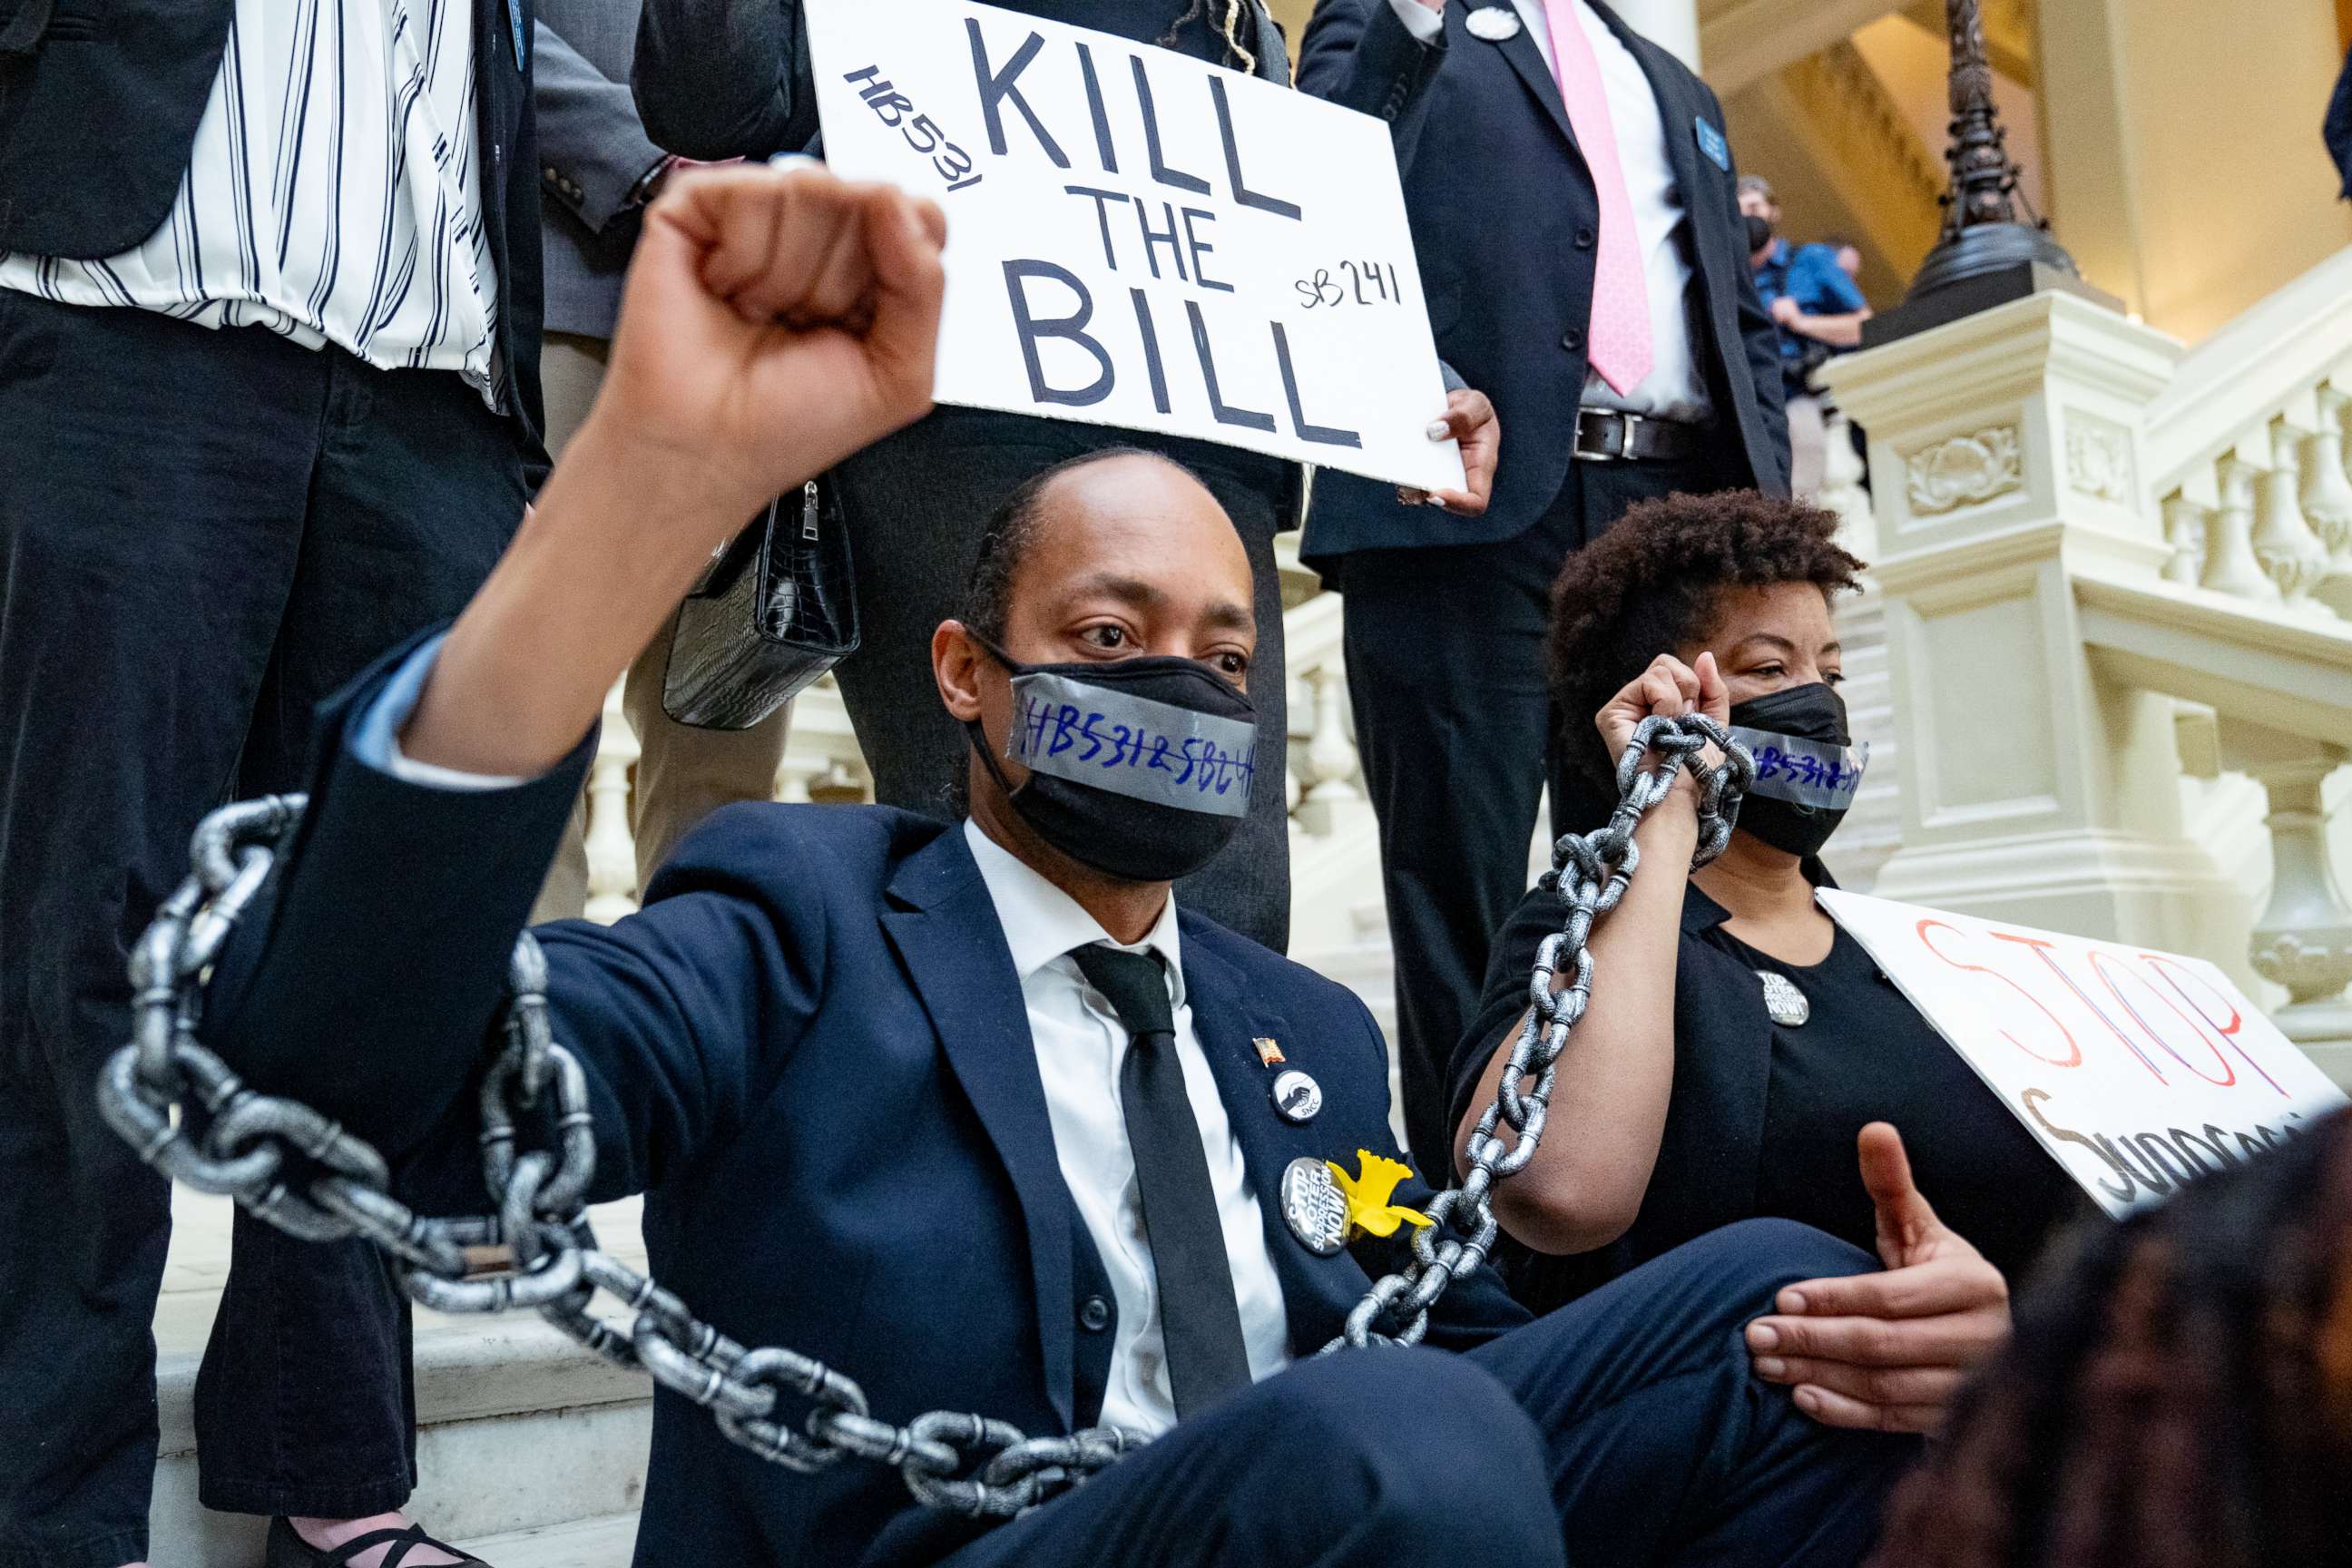 PHOTO: Demonstrators wear chains, March 8, 2021, while holding a sit-in inside of the Capitol building in Atlanta, in opposition of House Bill 531, one of the bills the GOP-led state legislature has been considering that would limit voting rights.